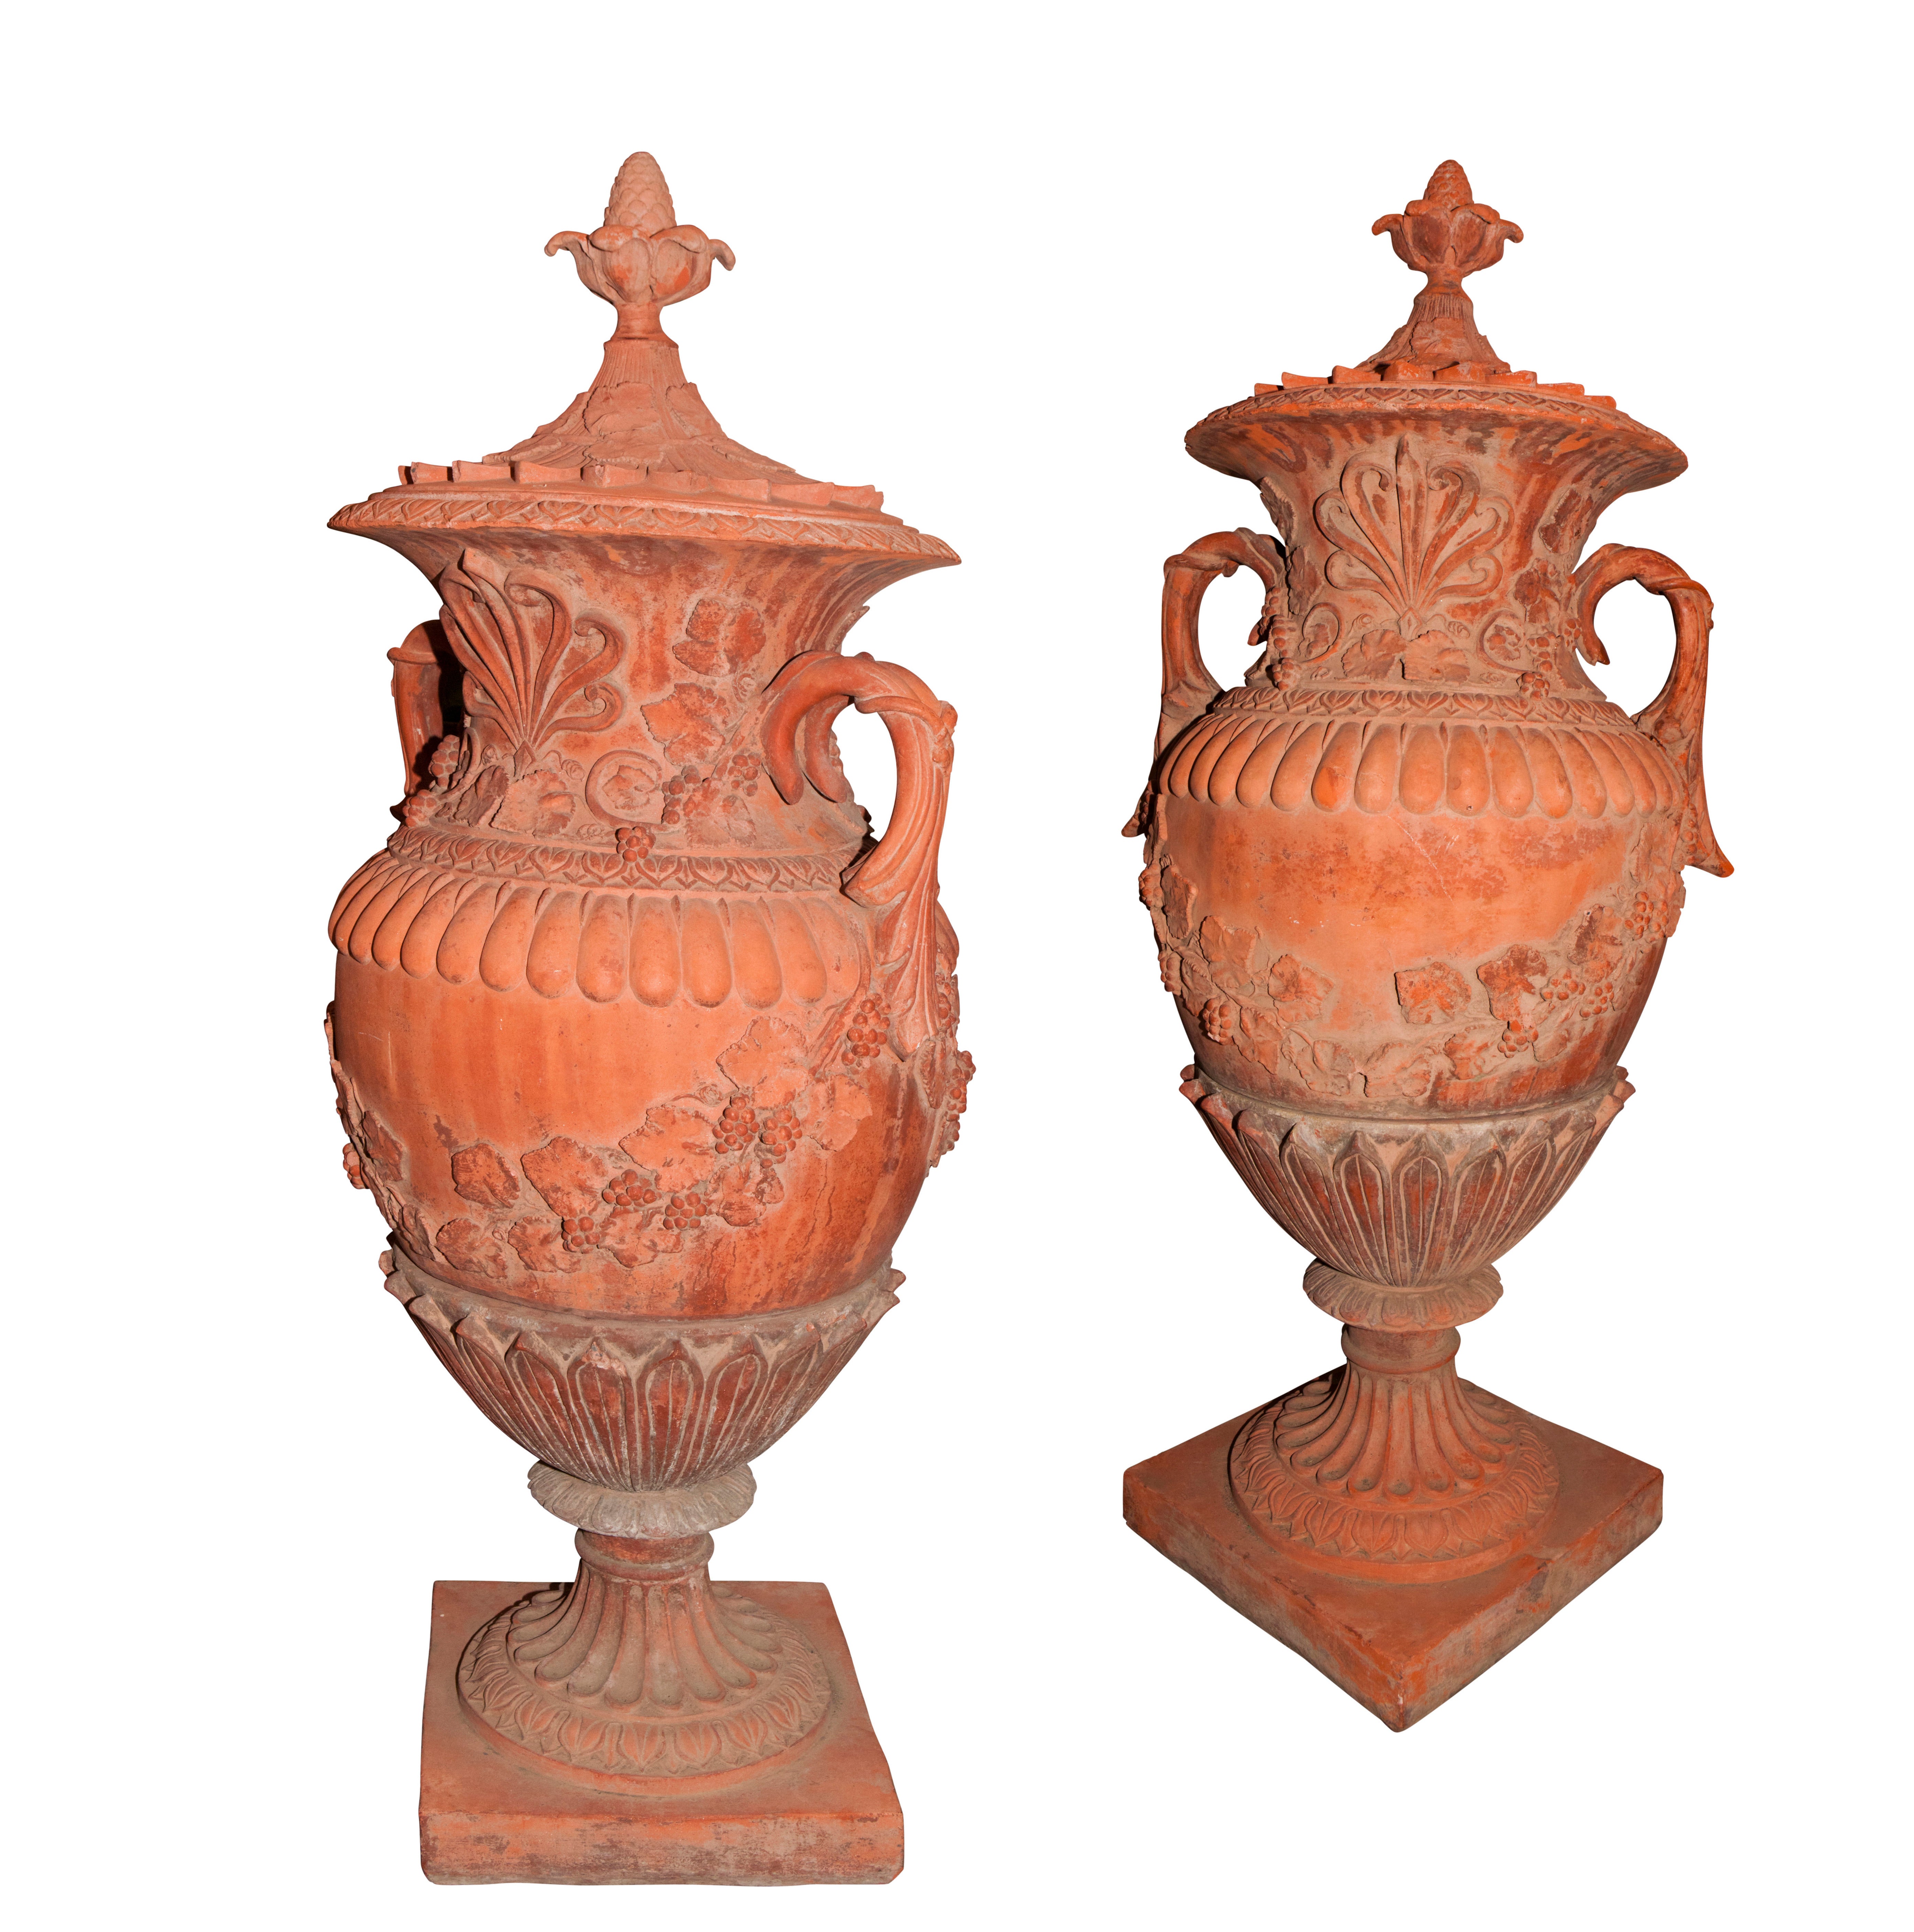 Pair of Large Red Terracotta Urns